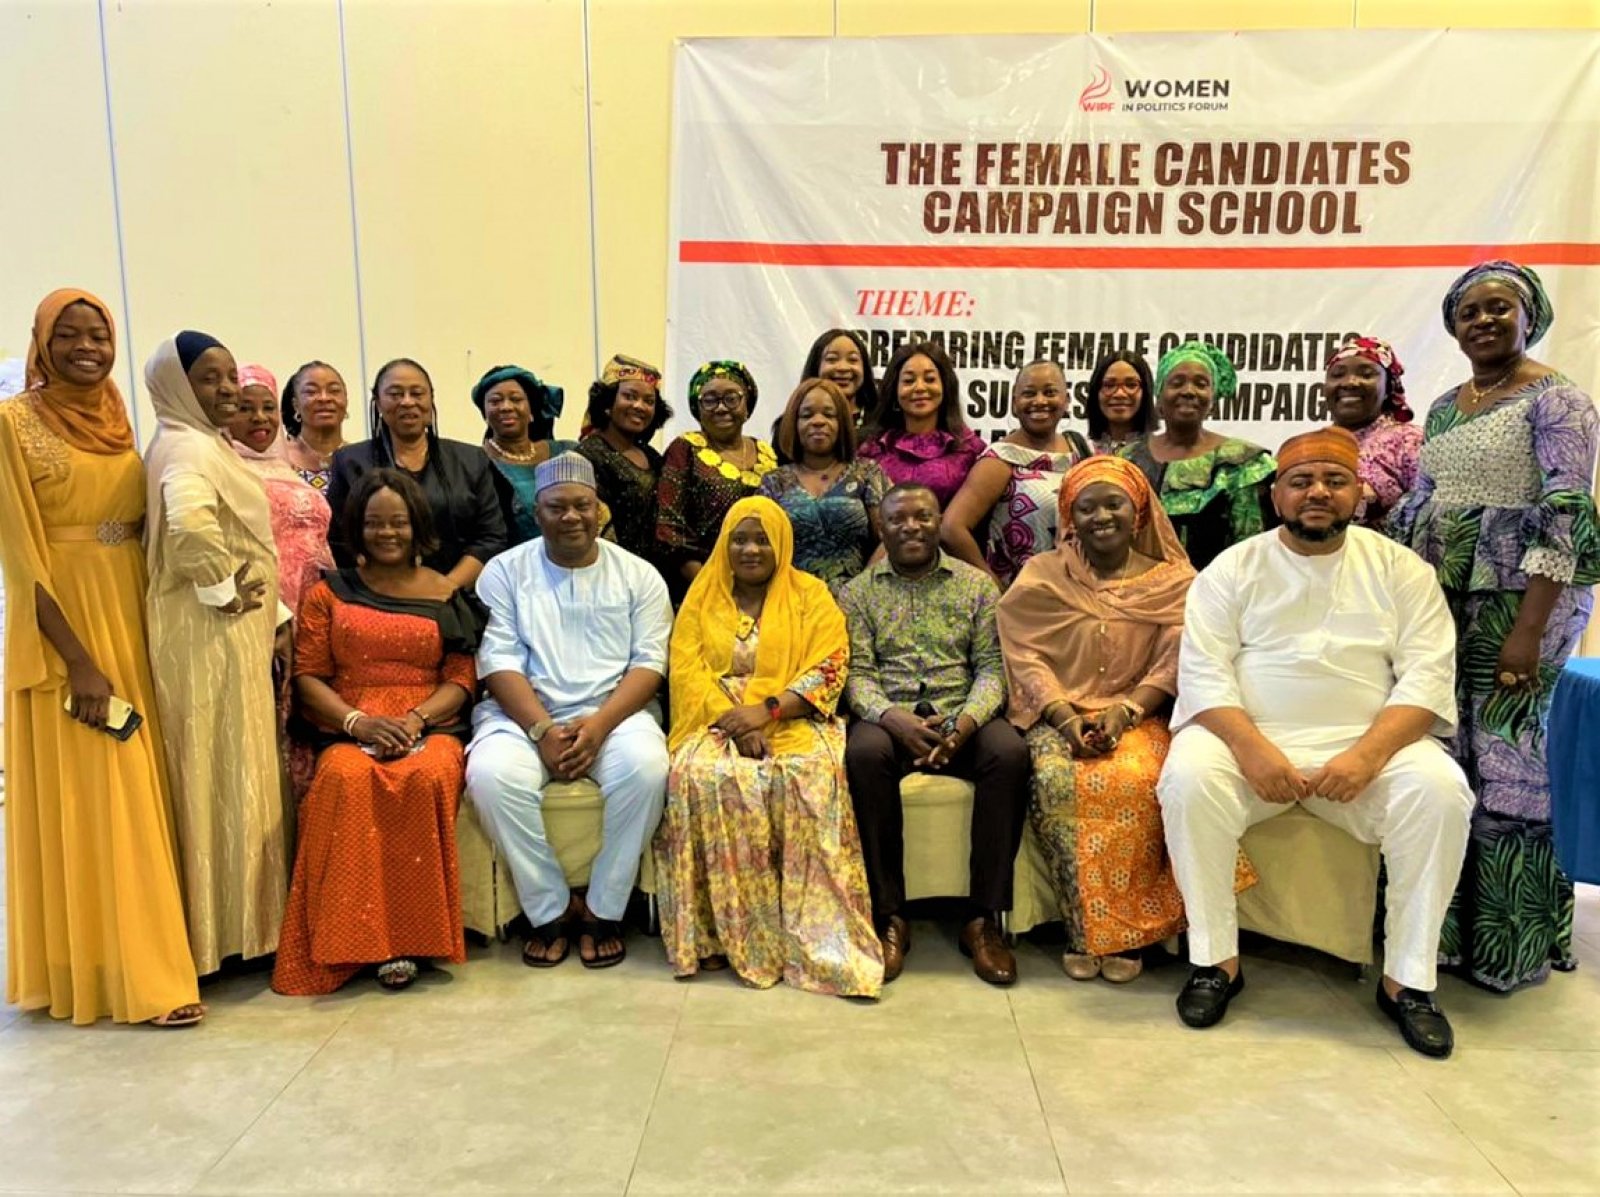 Women in Nigeria Rising to the Top Against All Odds